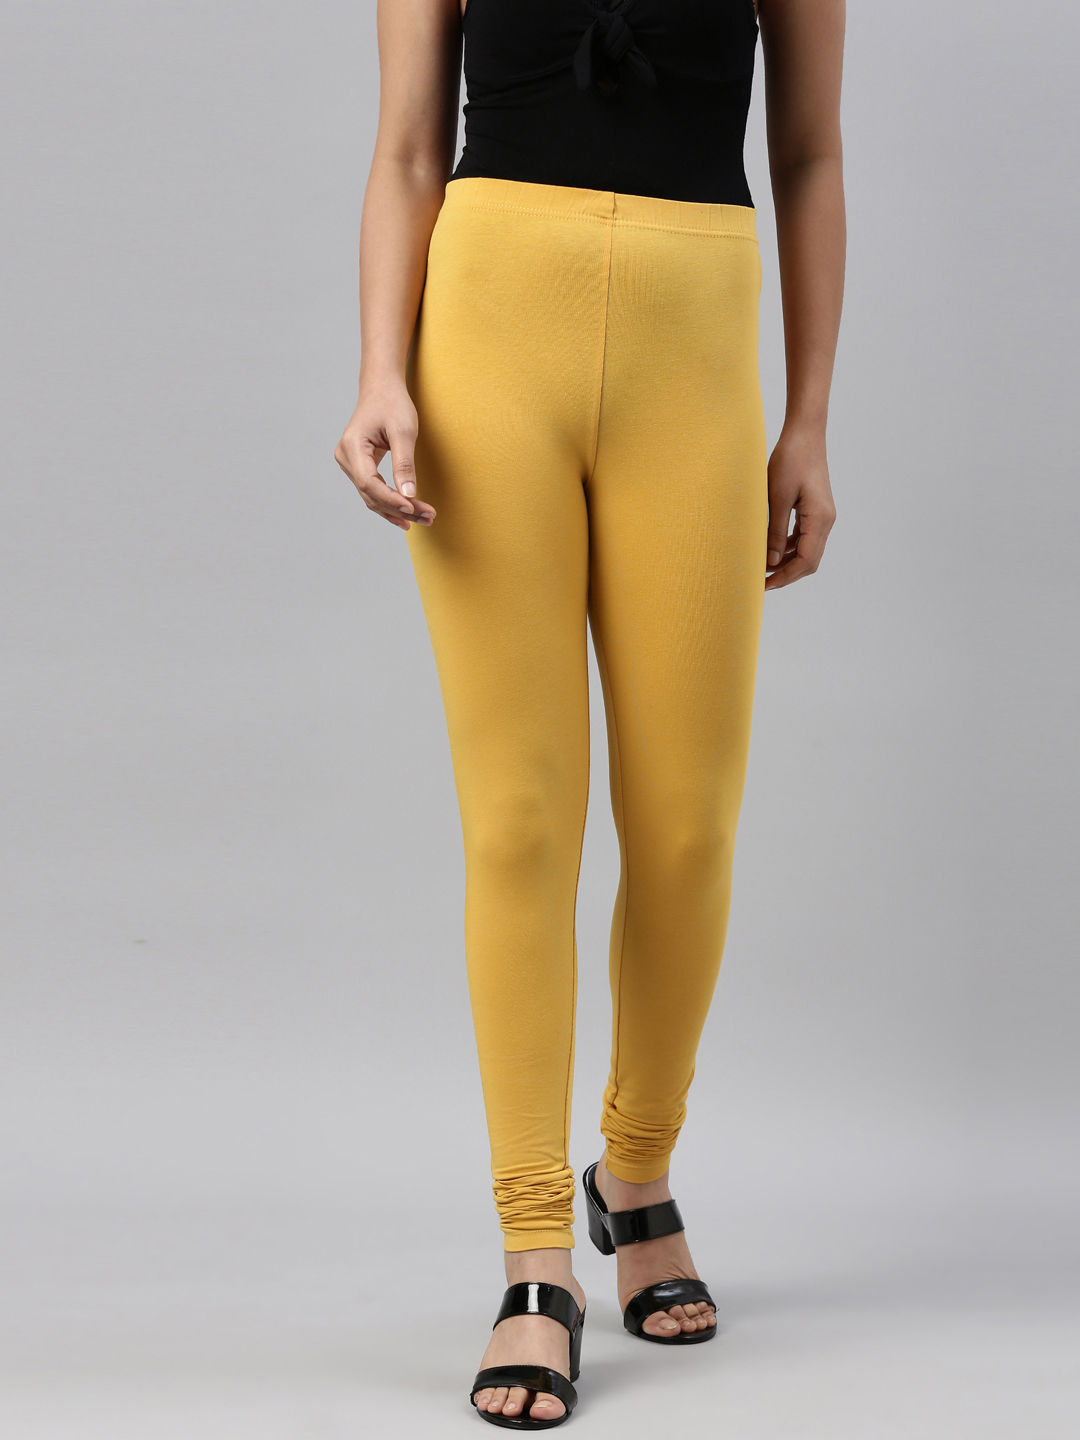 Plus Size Women's Game of Death and Kill Bill Inspired Yoga Pants: Per –  Soldier Complex